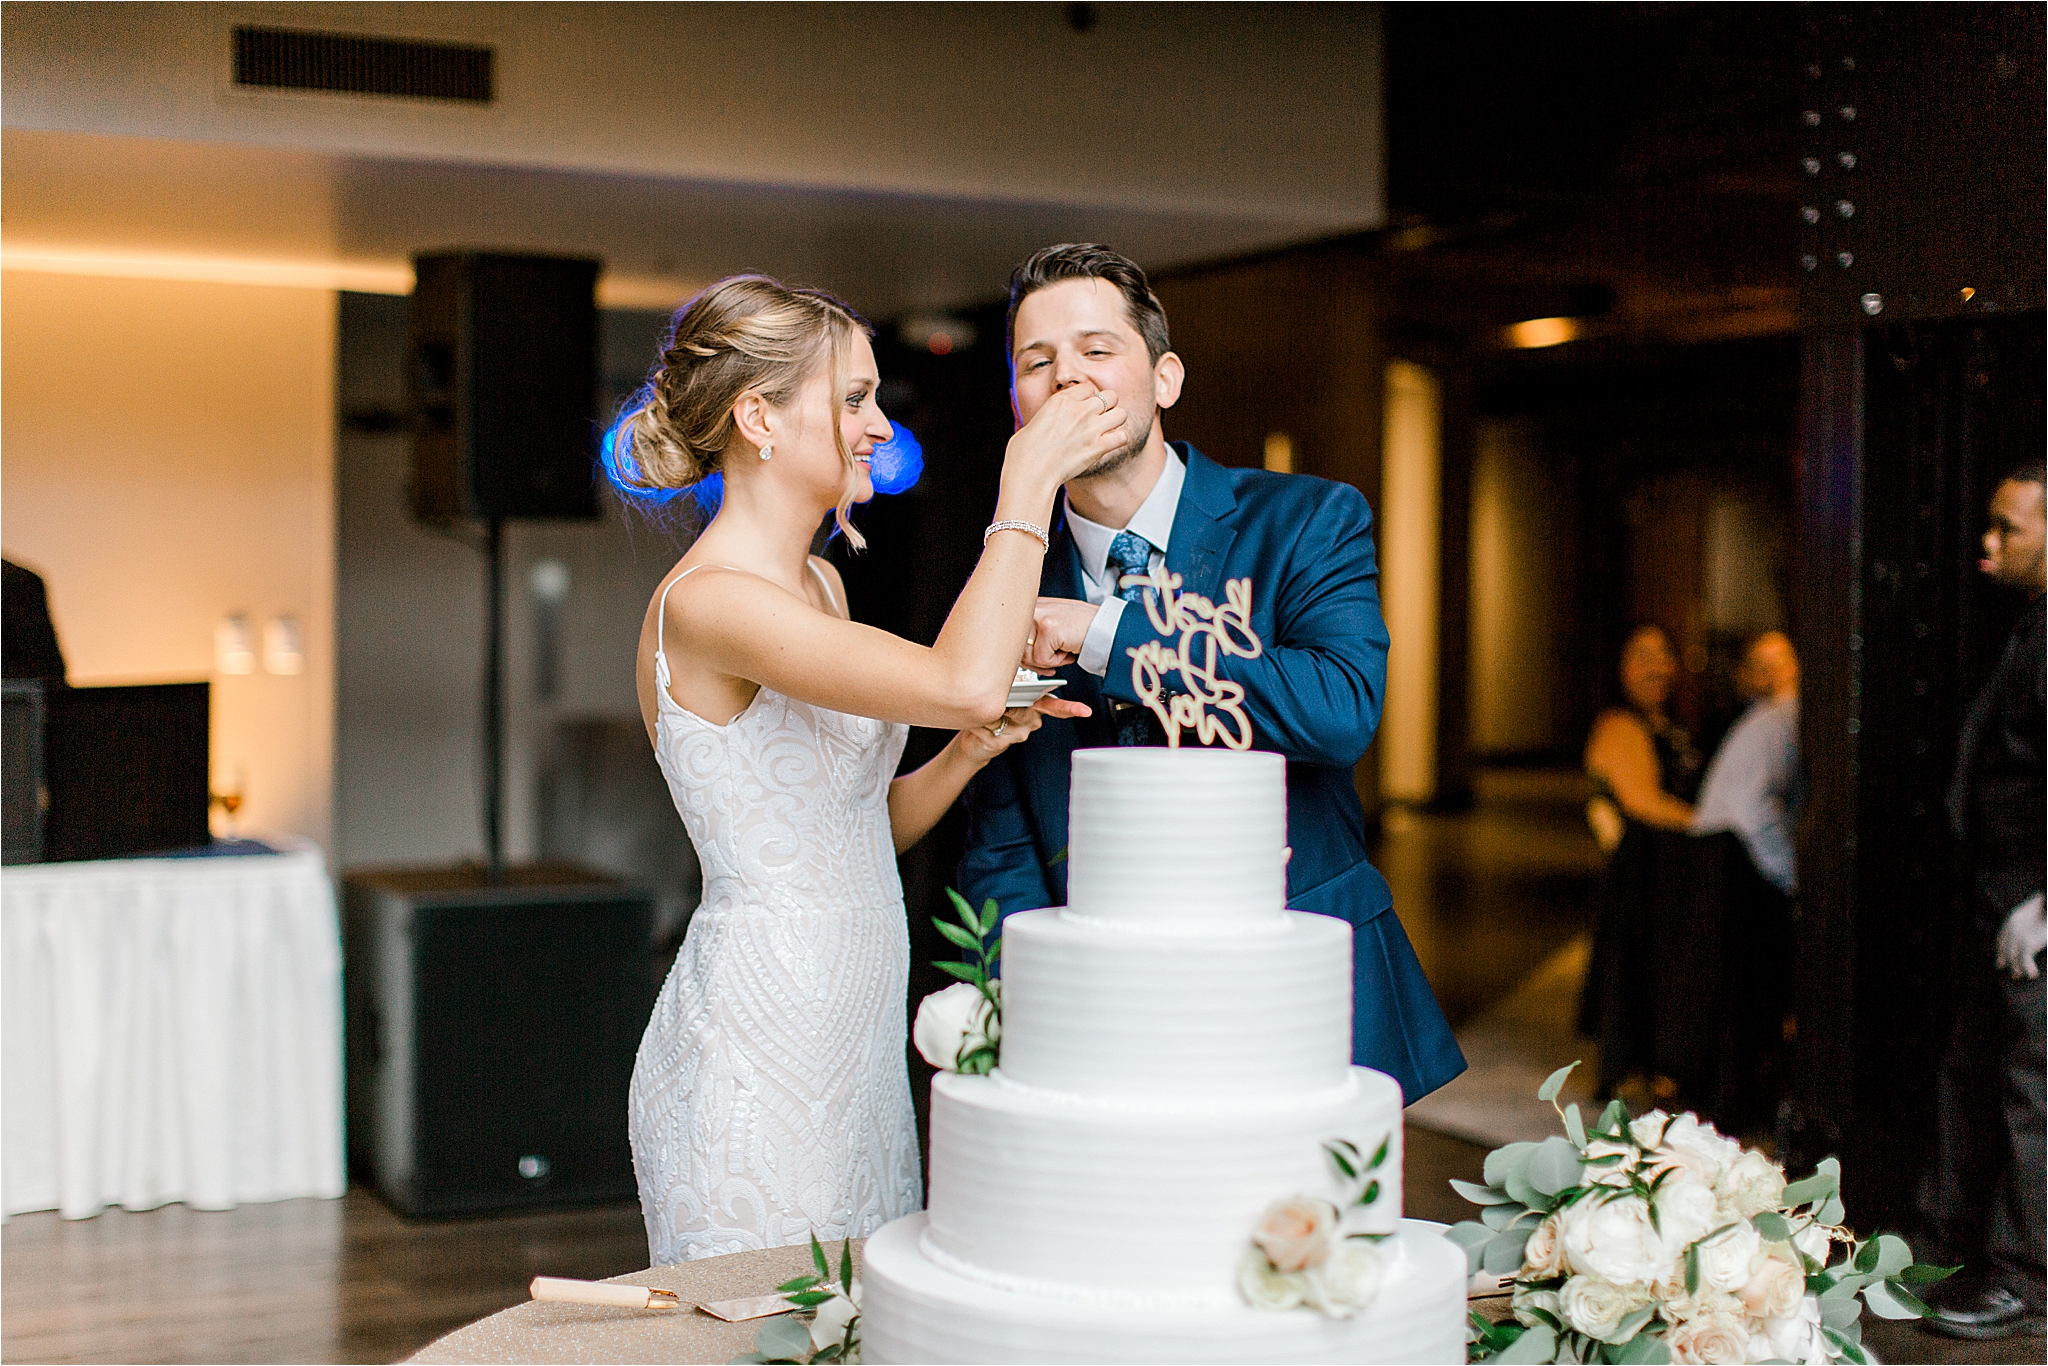 Bride and groom cutting cake by Wild Flour Bakery at Windows on the River